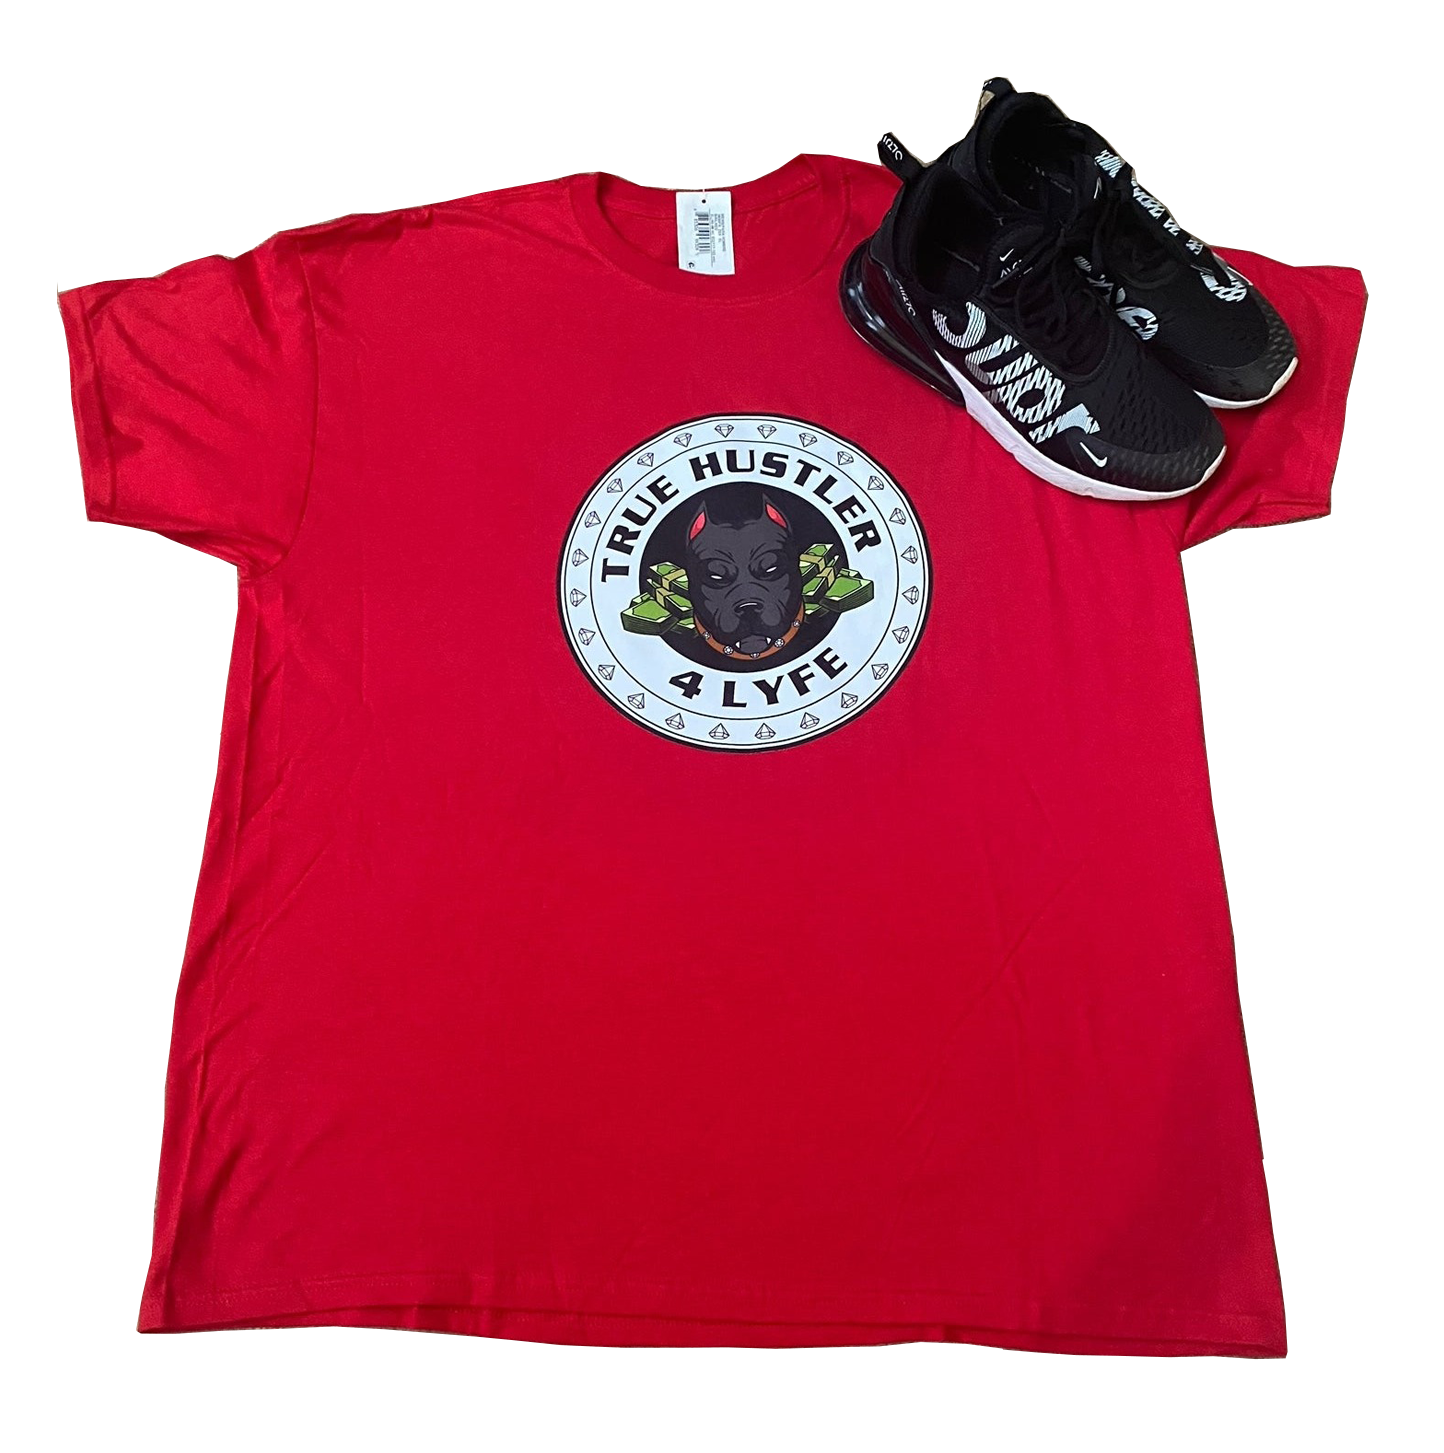 "TH4L Grind Collection Unisex Graphic Tees - Red Heavy Duty Cotton T-Shirt and White Grind Logo Tee"